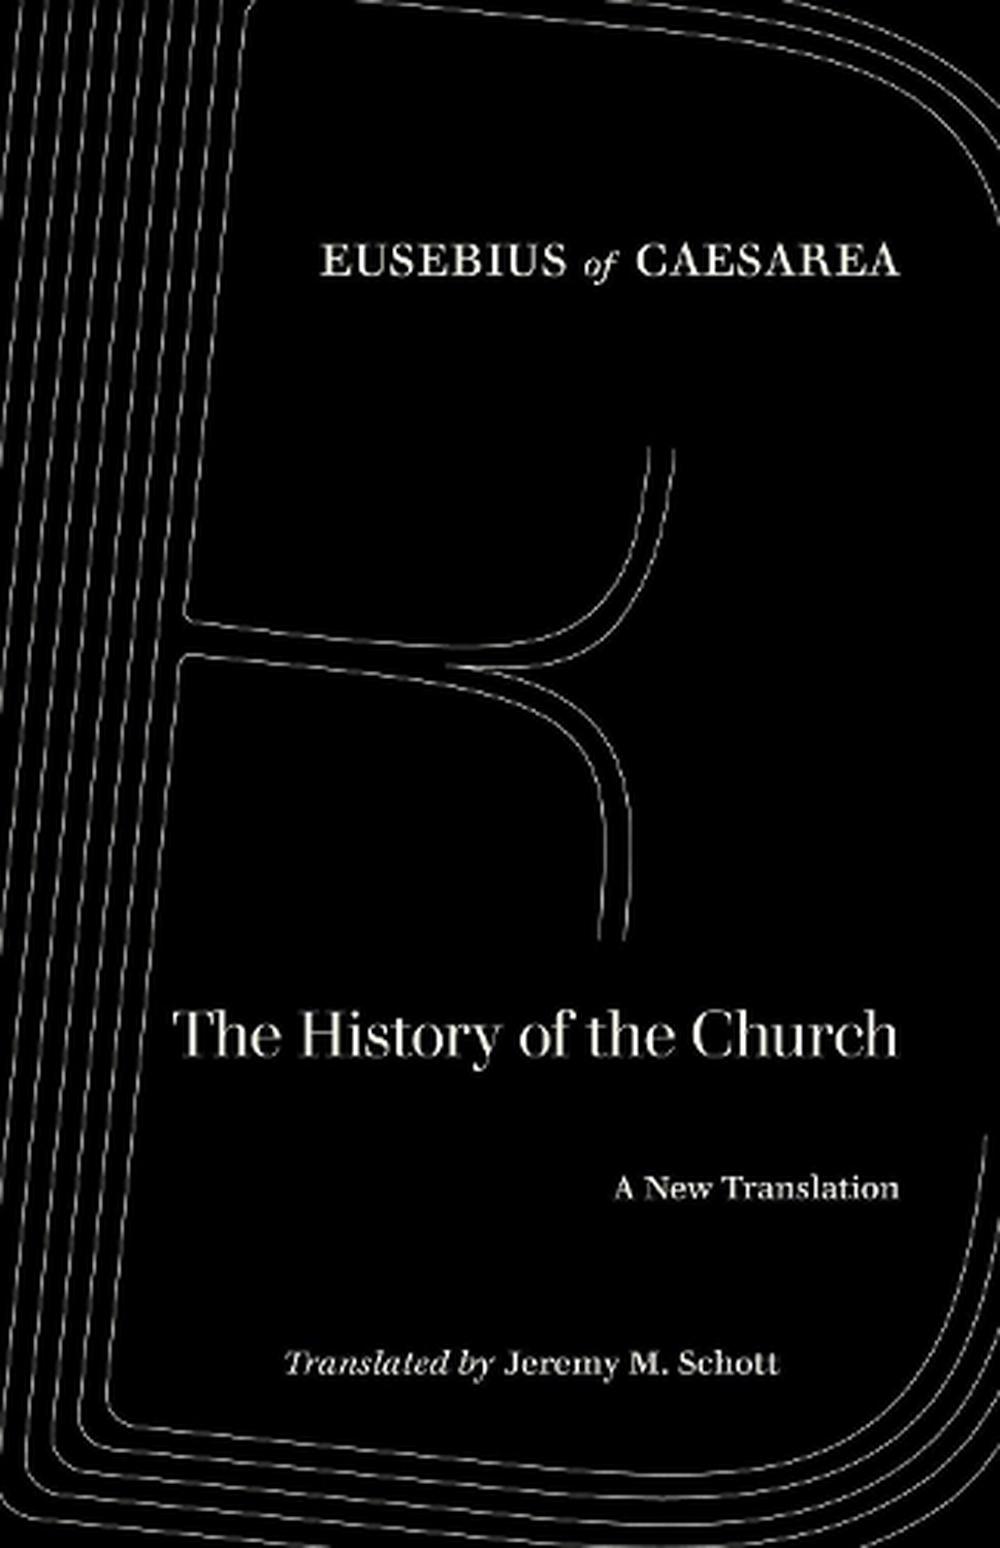 eusebius history of the church online